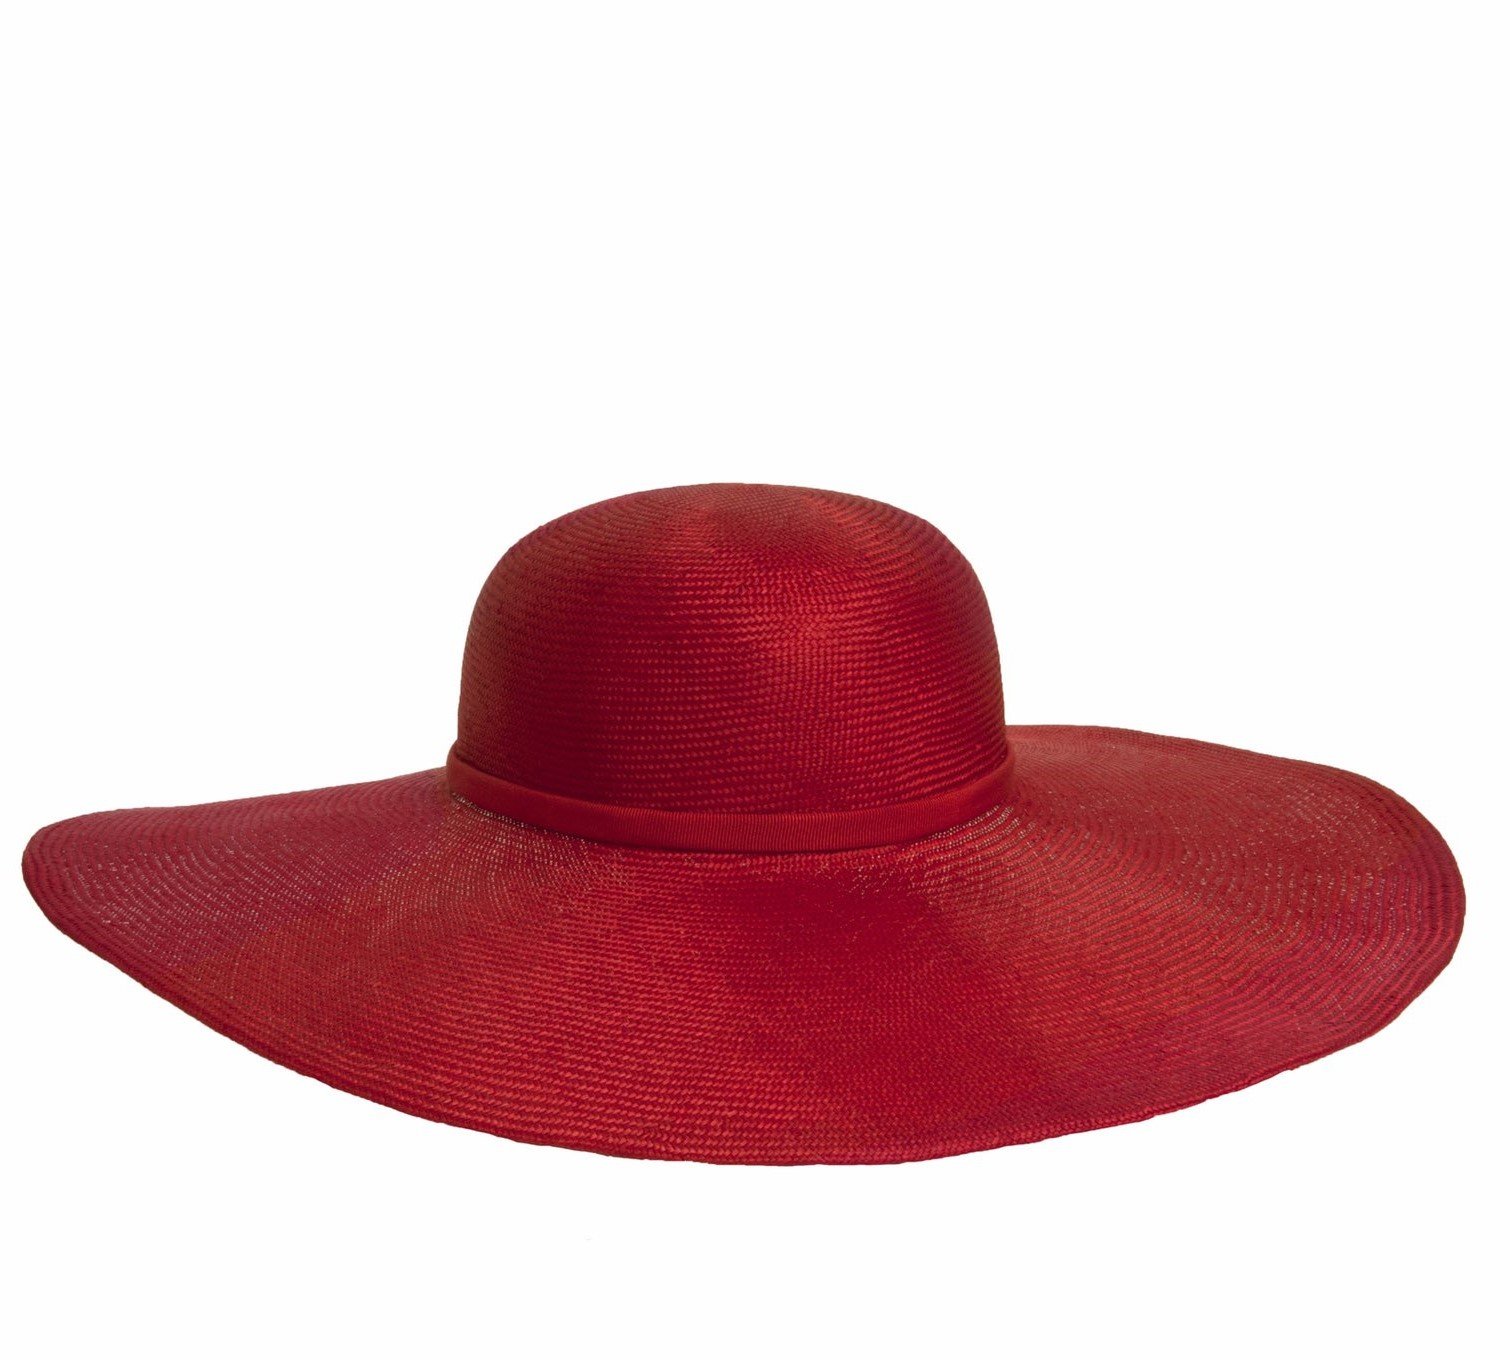 Fabienne Delvigne Laurany Hat in Red.jpg